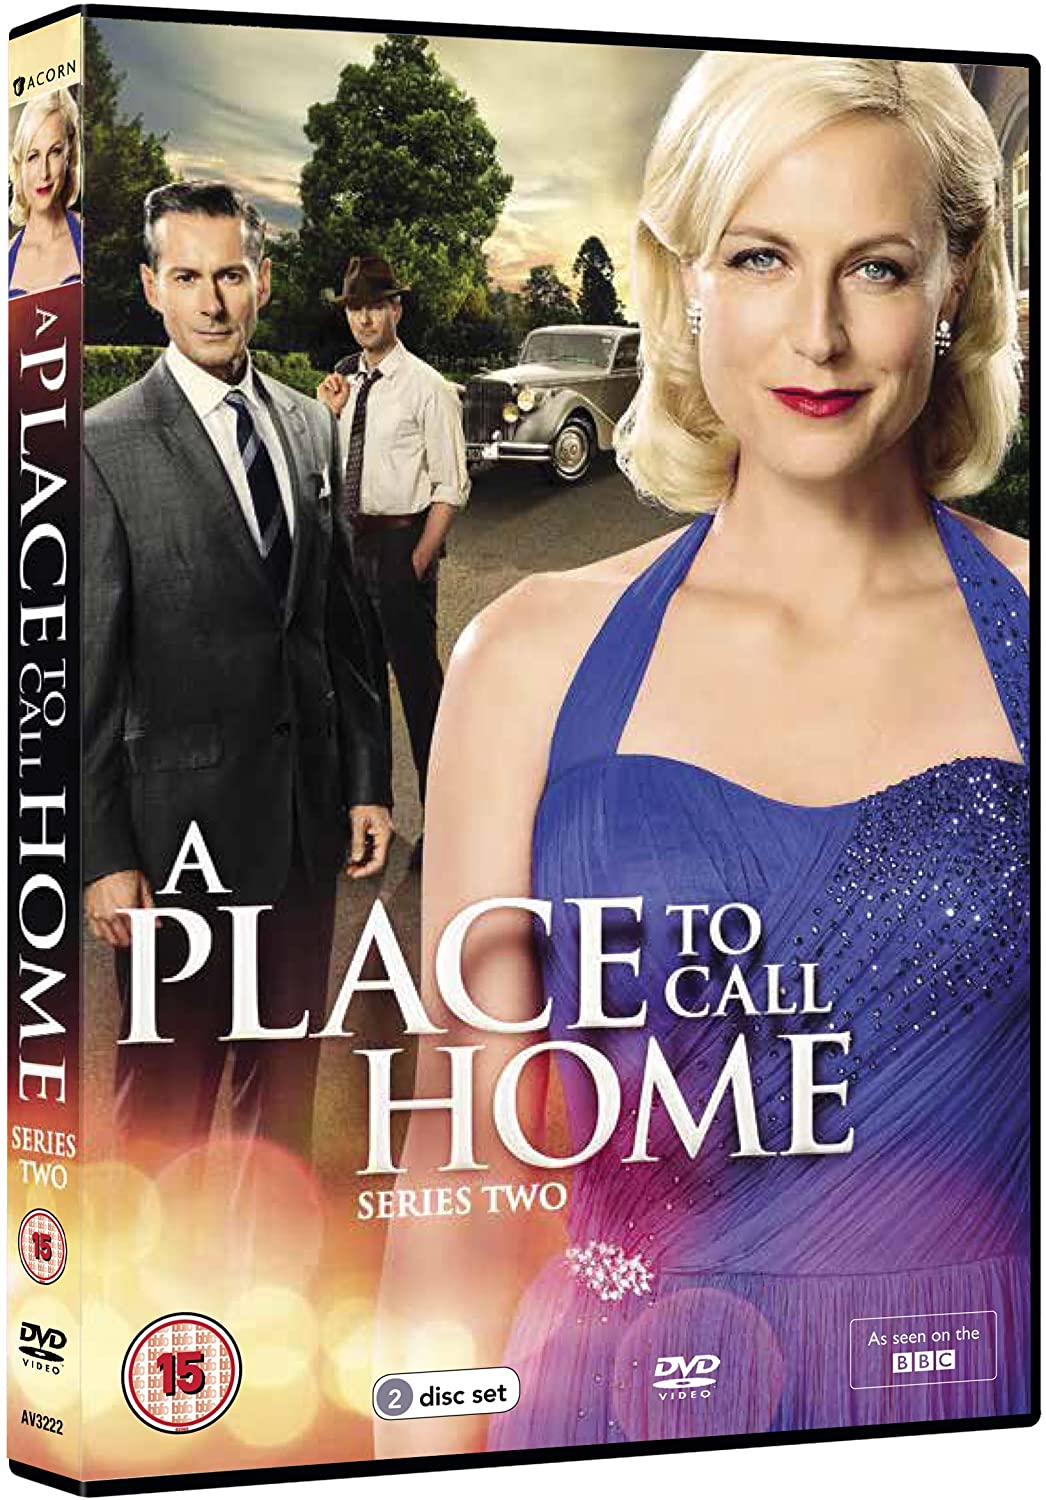 A Place to Call Home, Serie Zwei – [DVD]